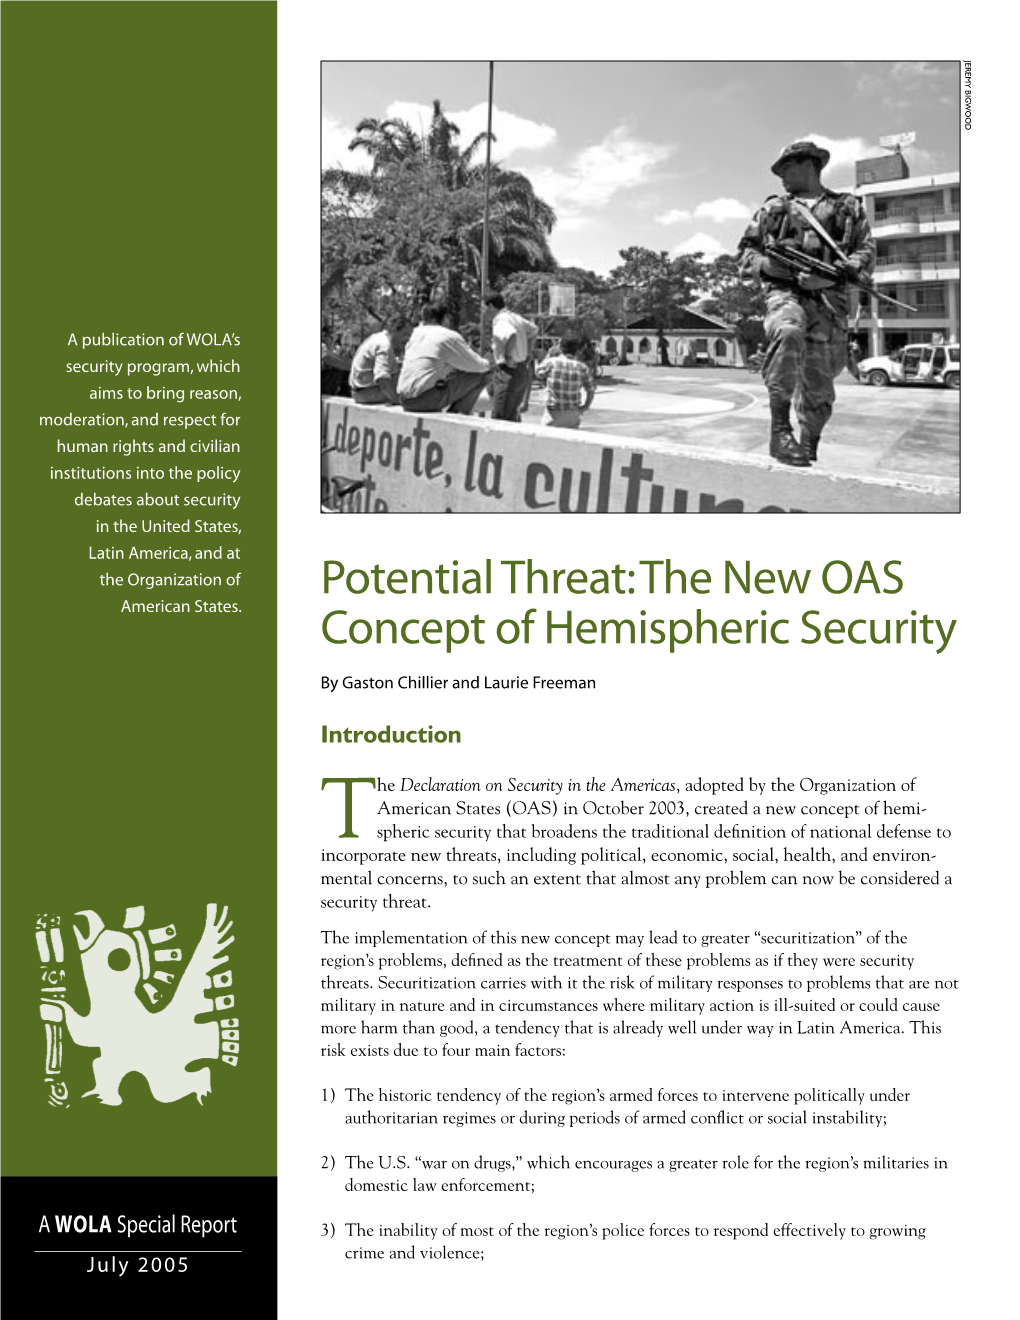 Potential Threat: the New OAS Concept of Hemispheric Security and the Pentagon Provided Helicopters and Other Equipment to Security Forces for Drug Control Activities